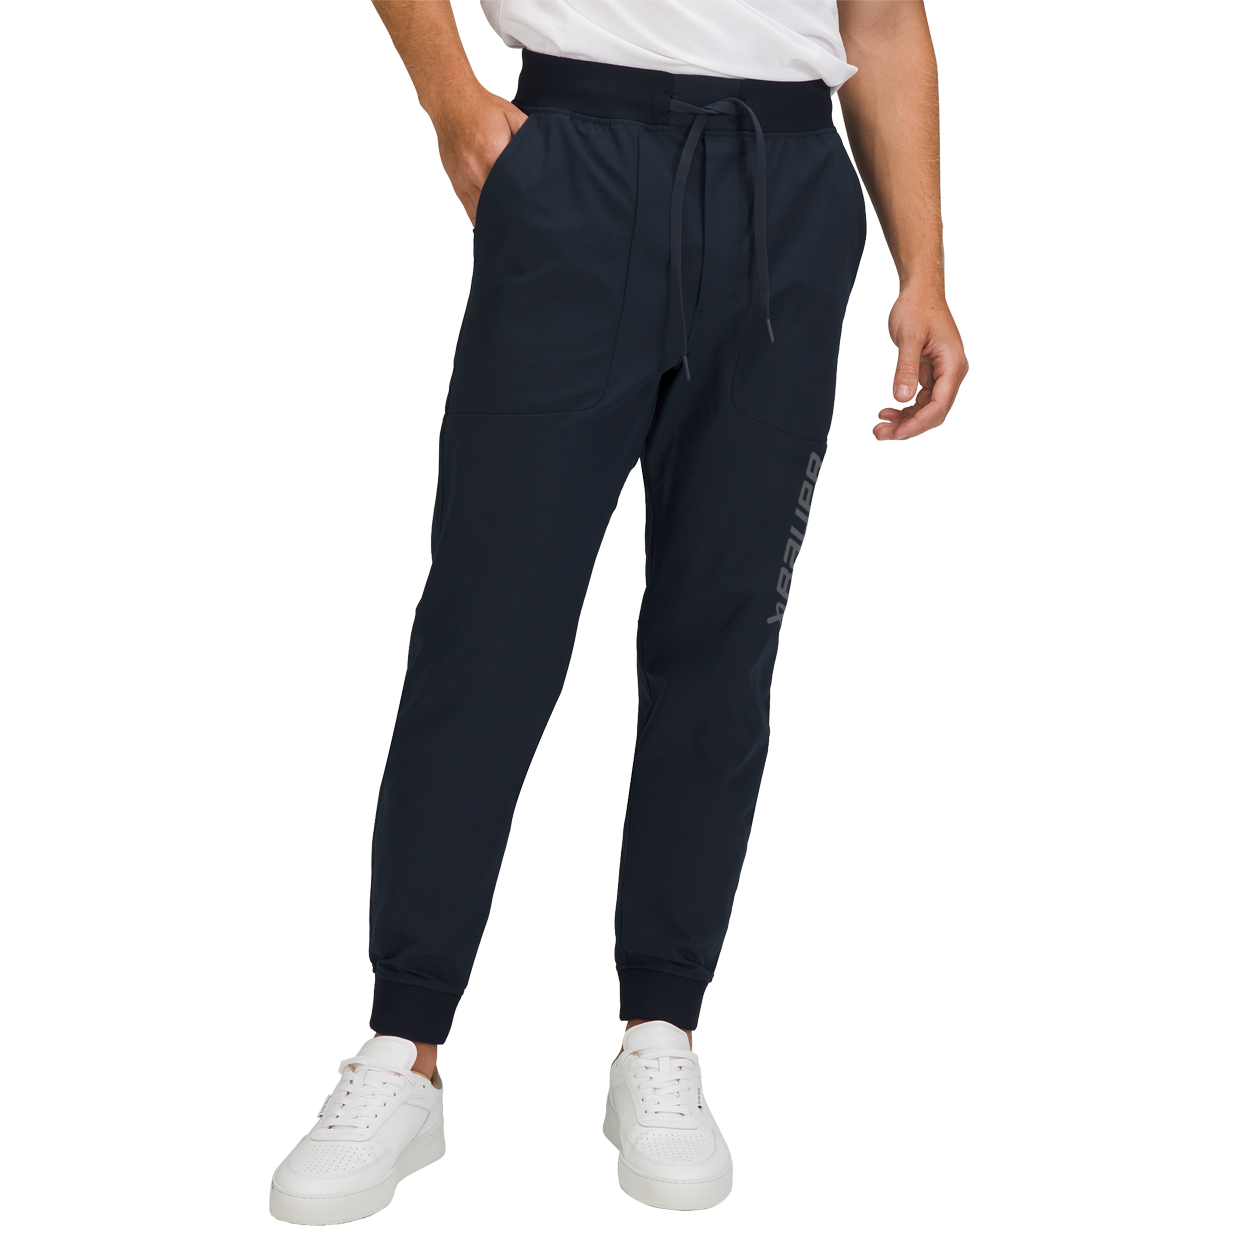 Lululemon Men's ABC Jogger Warpstreme Various Color and Size New with Tag